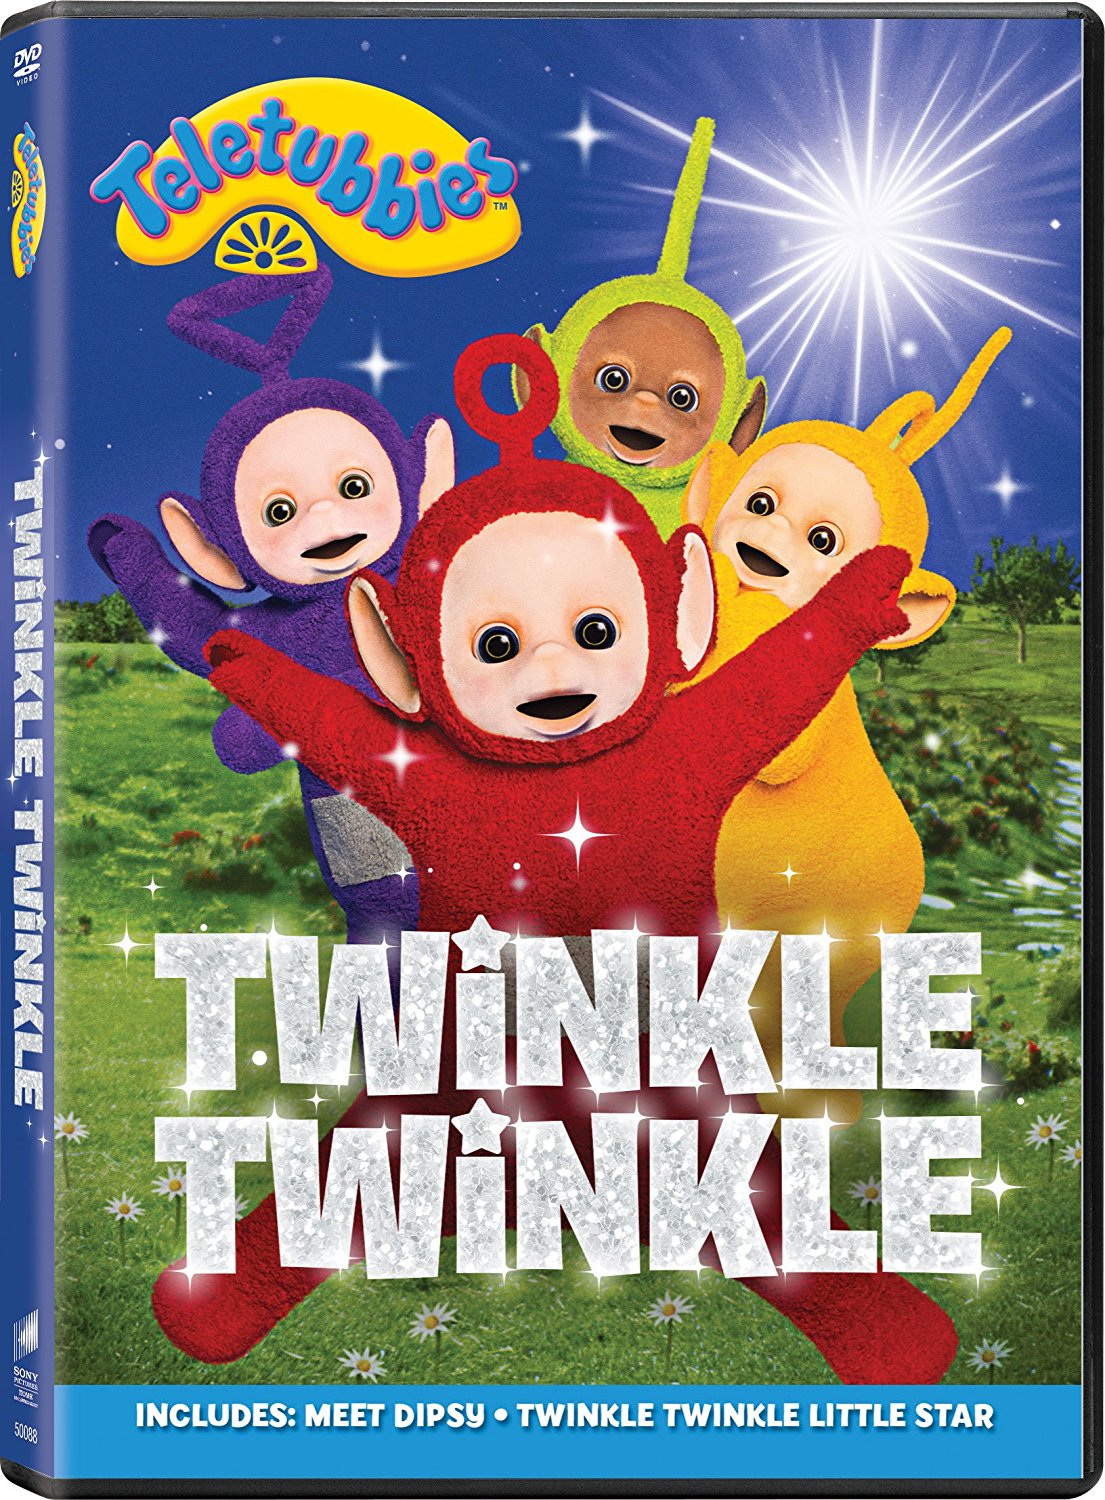 Kidscreen » Archive » Teletubbies Lets Go! offers a digital-first